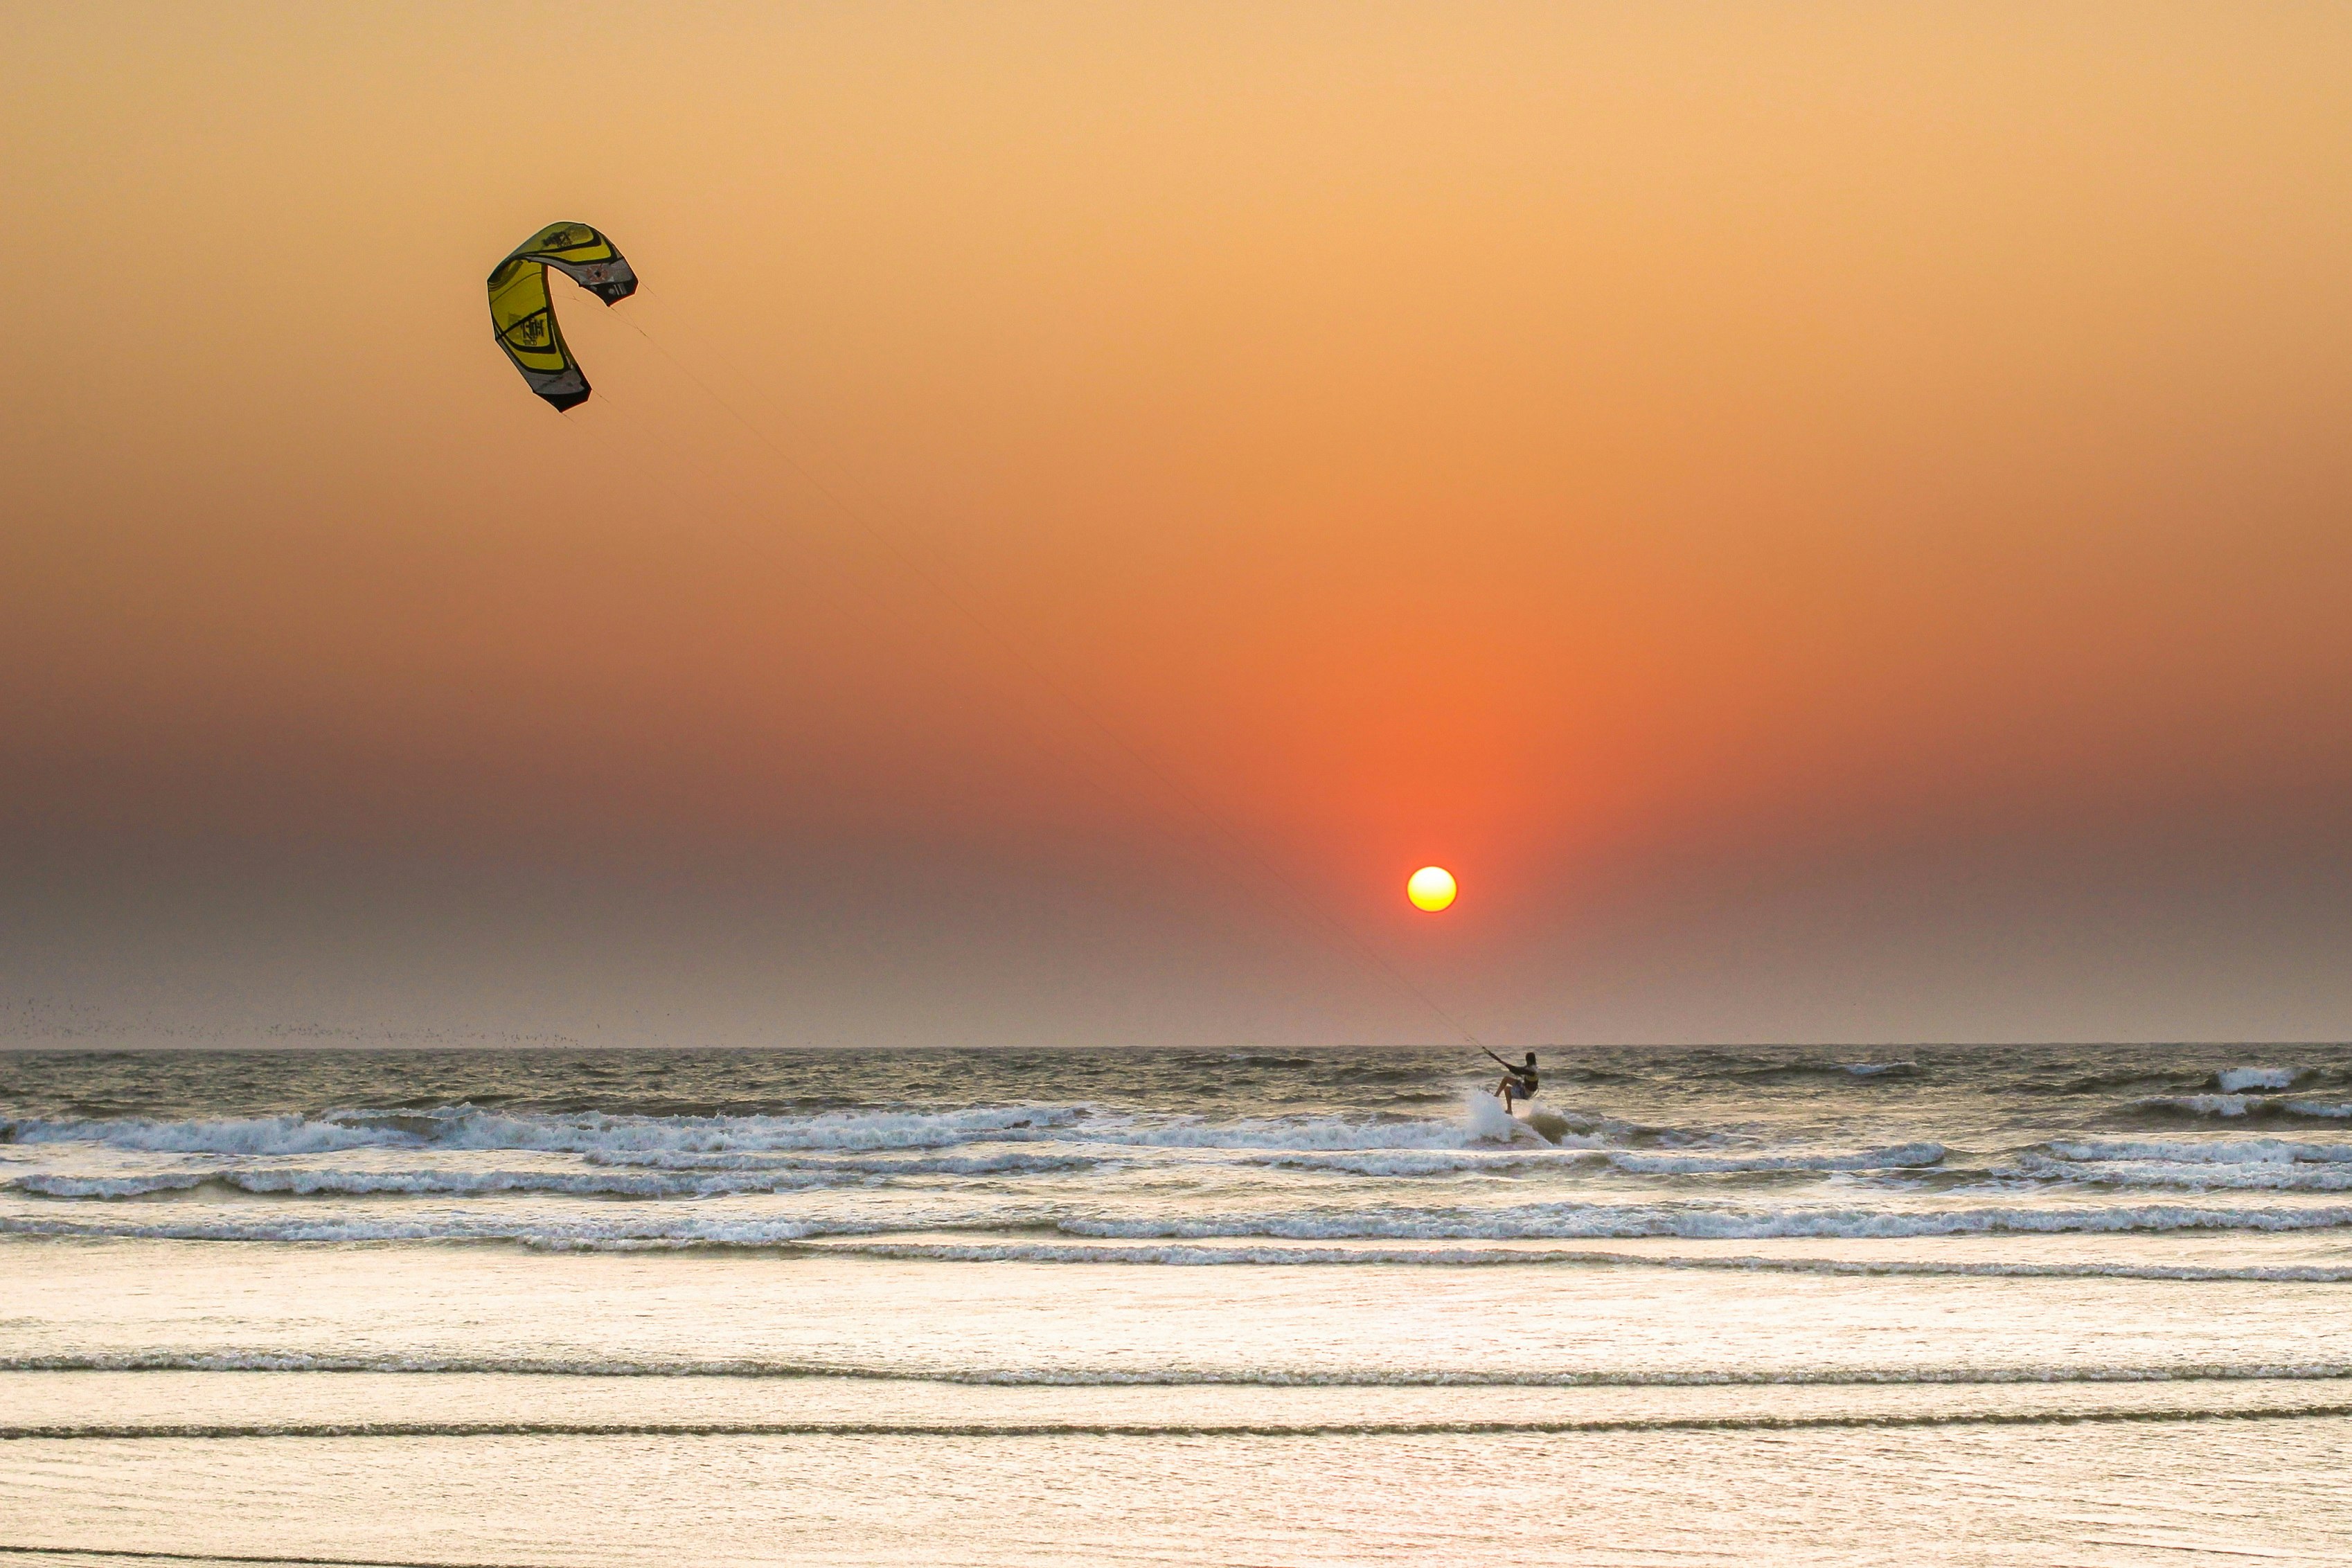 A kite surfer in the waves in front of an orange sunset